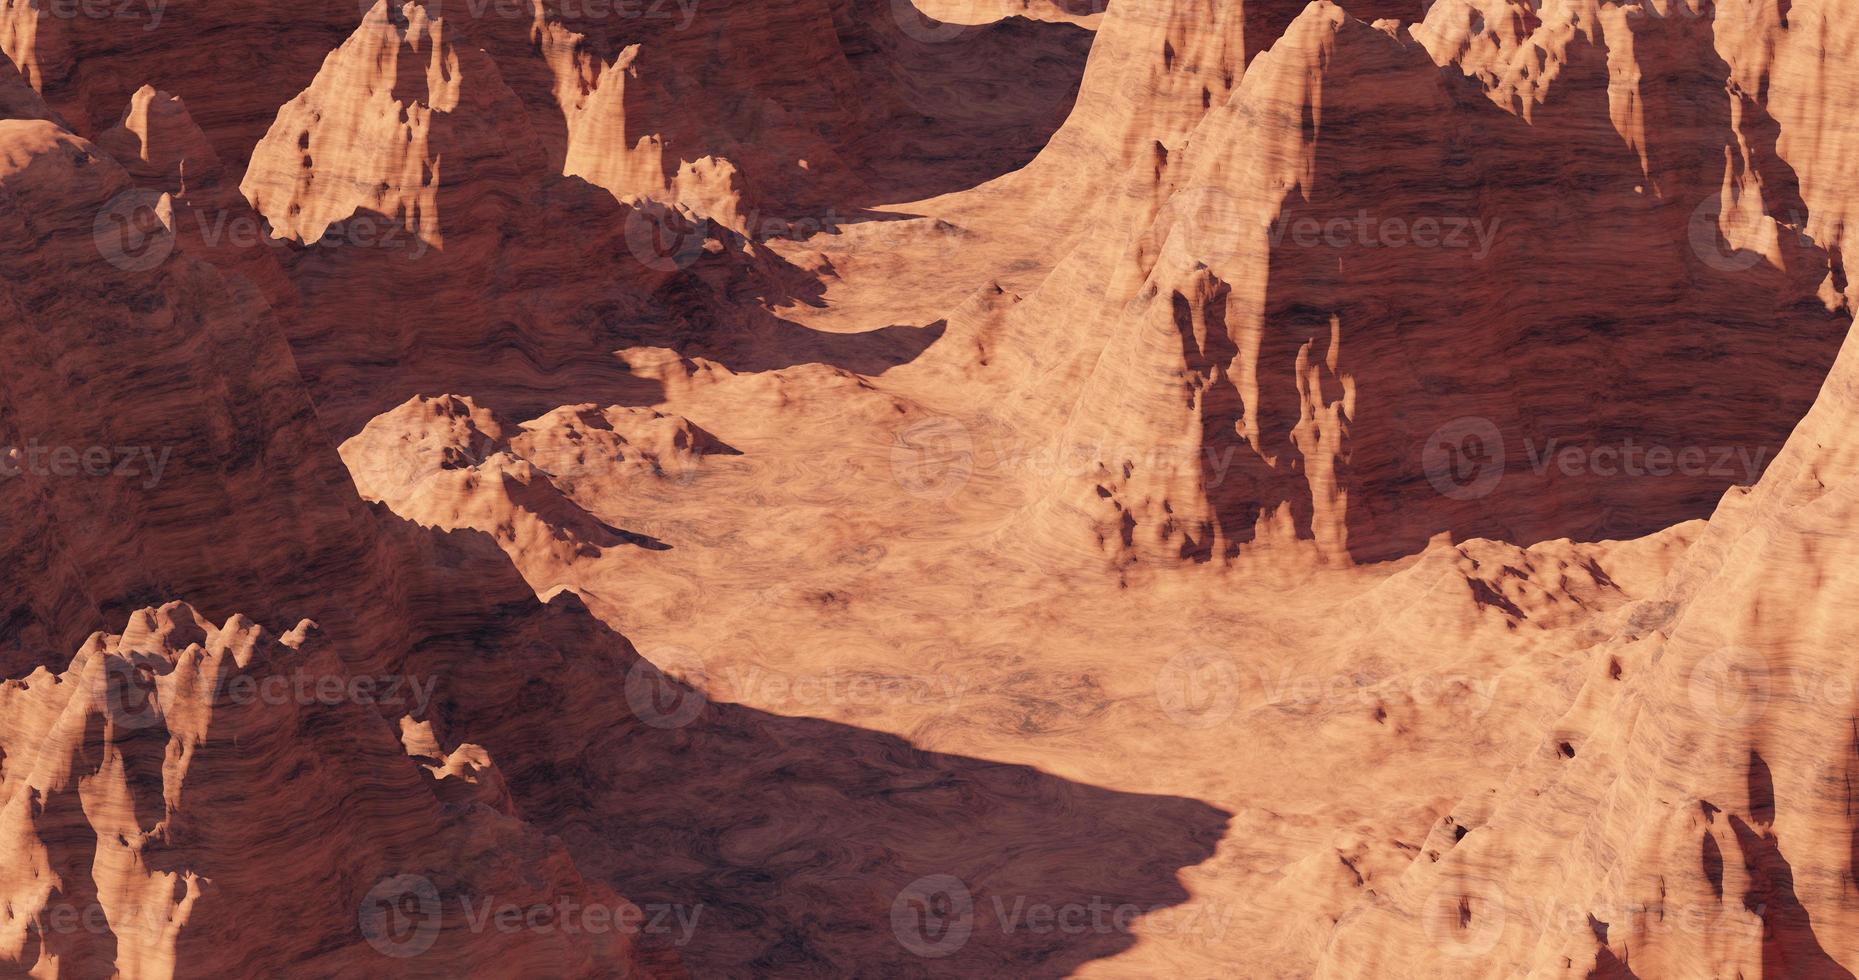 3d render of imaginary mars planet terrain, Mars planet landscape, orange eroded desert with mountains and sun, realistic science fiction illustration. photo